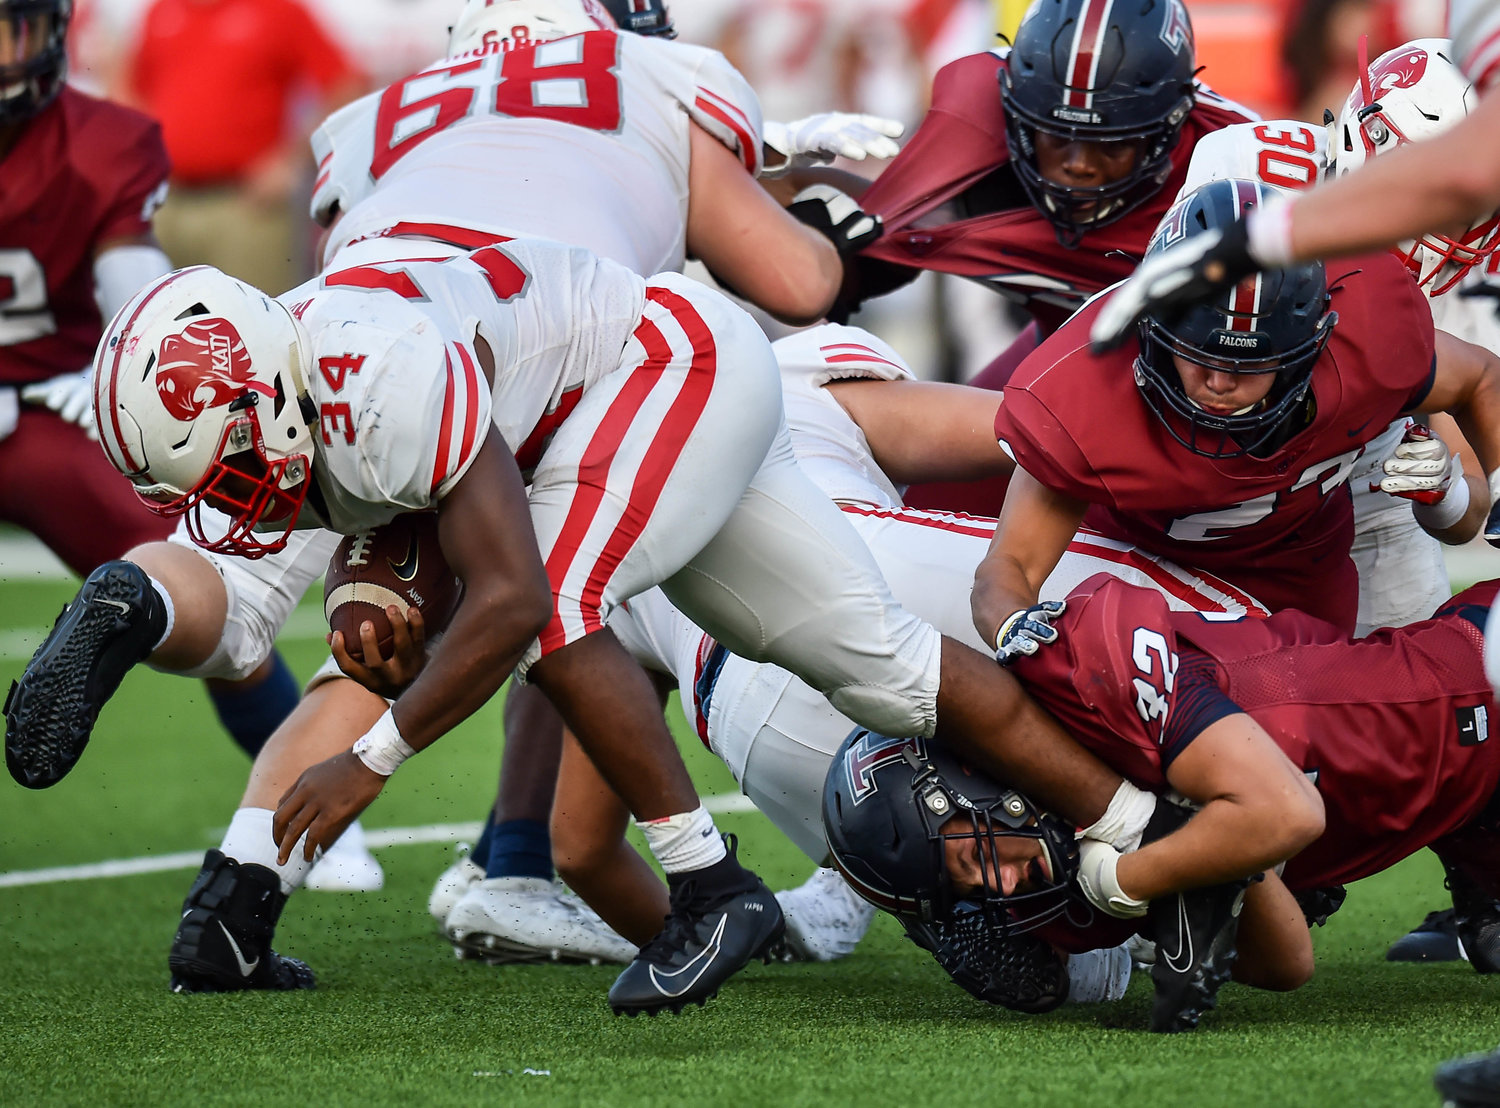 Katy, Tx. Oct. 3, 2019: Katy's Ronald Hoff (34) carries the ball getting tripped up by Tompkins Bryce Shaink (32) during a game between Katy Tigers and Tompkins Falcons at Legacy Stadium in Katy. (Photo by Mark Goodman / Katy Times)